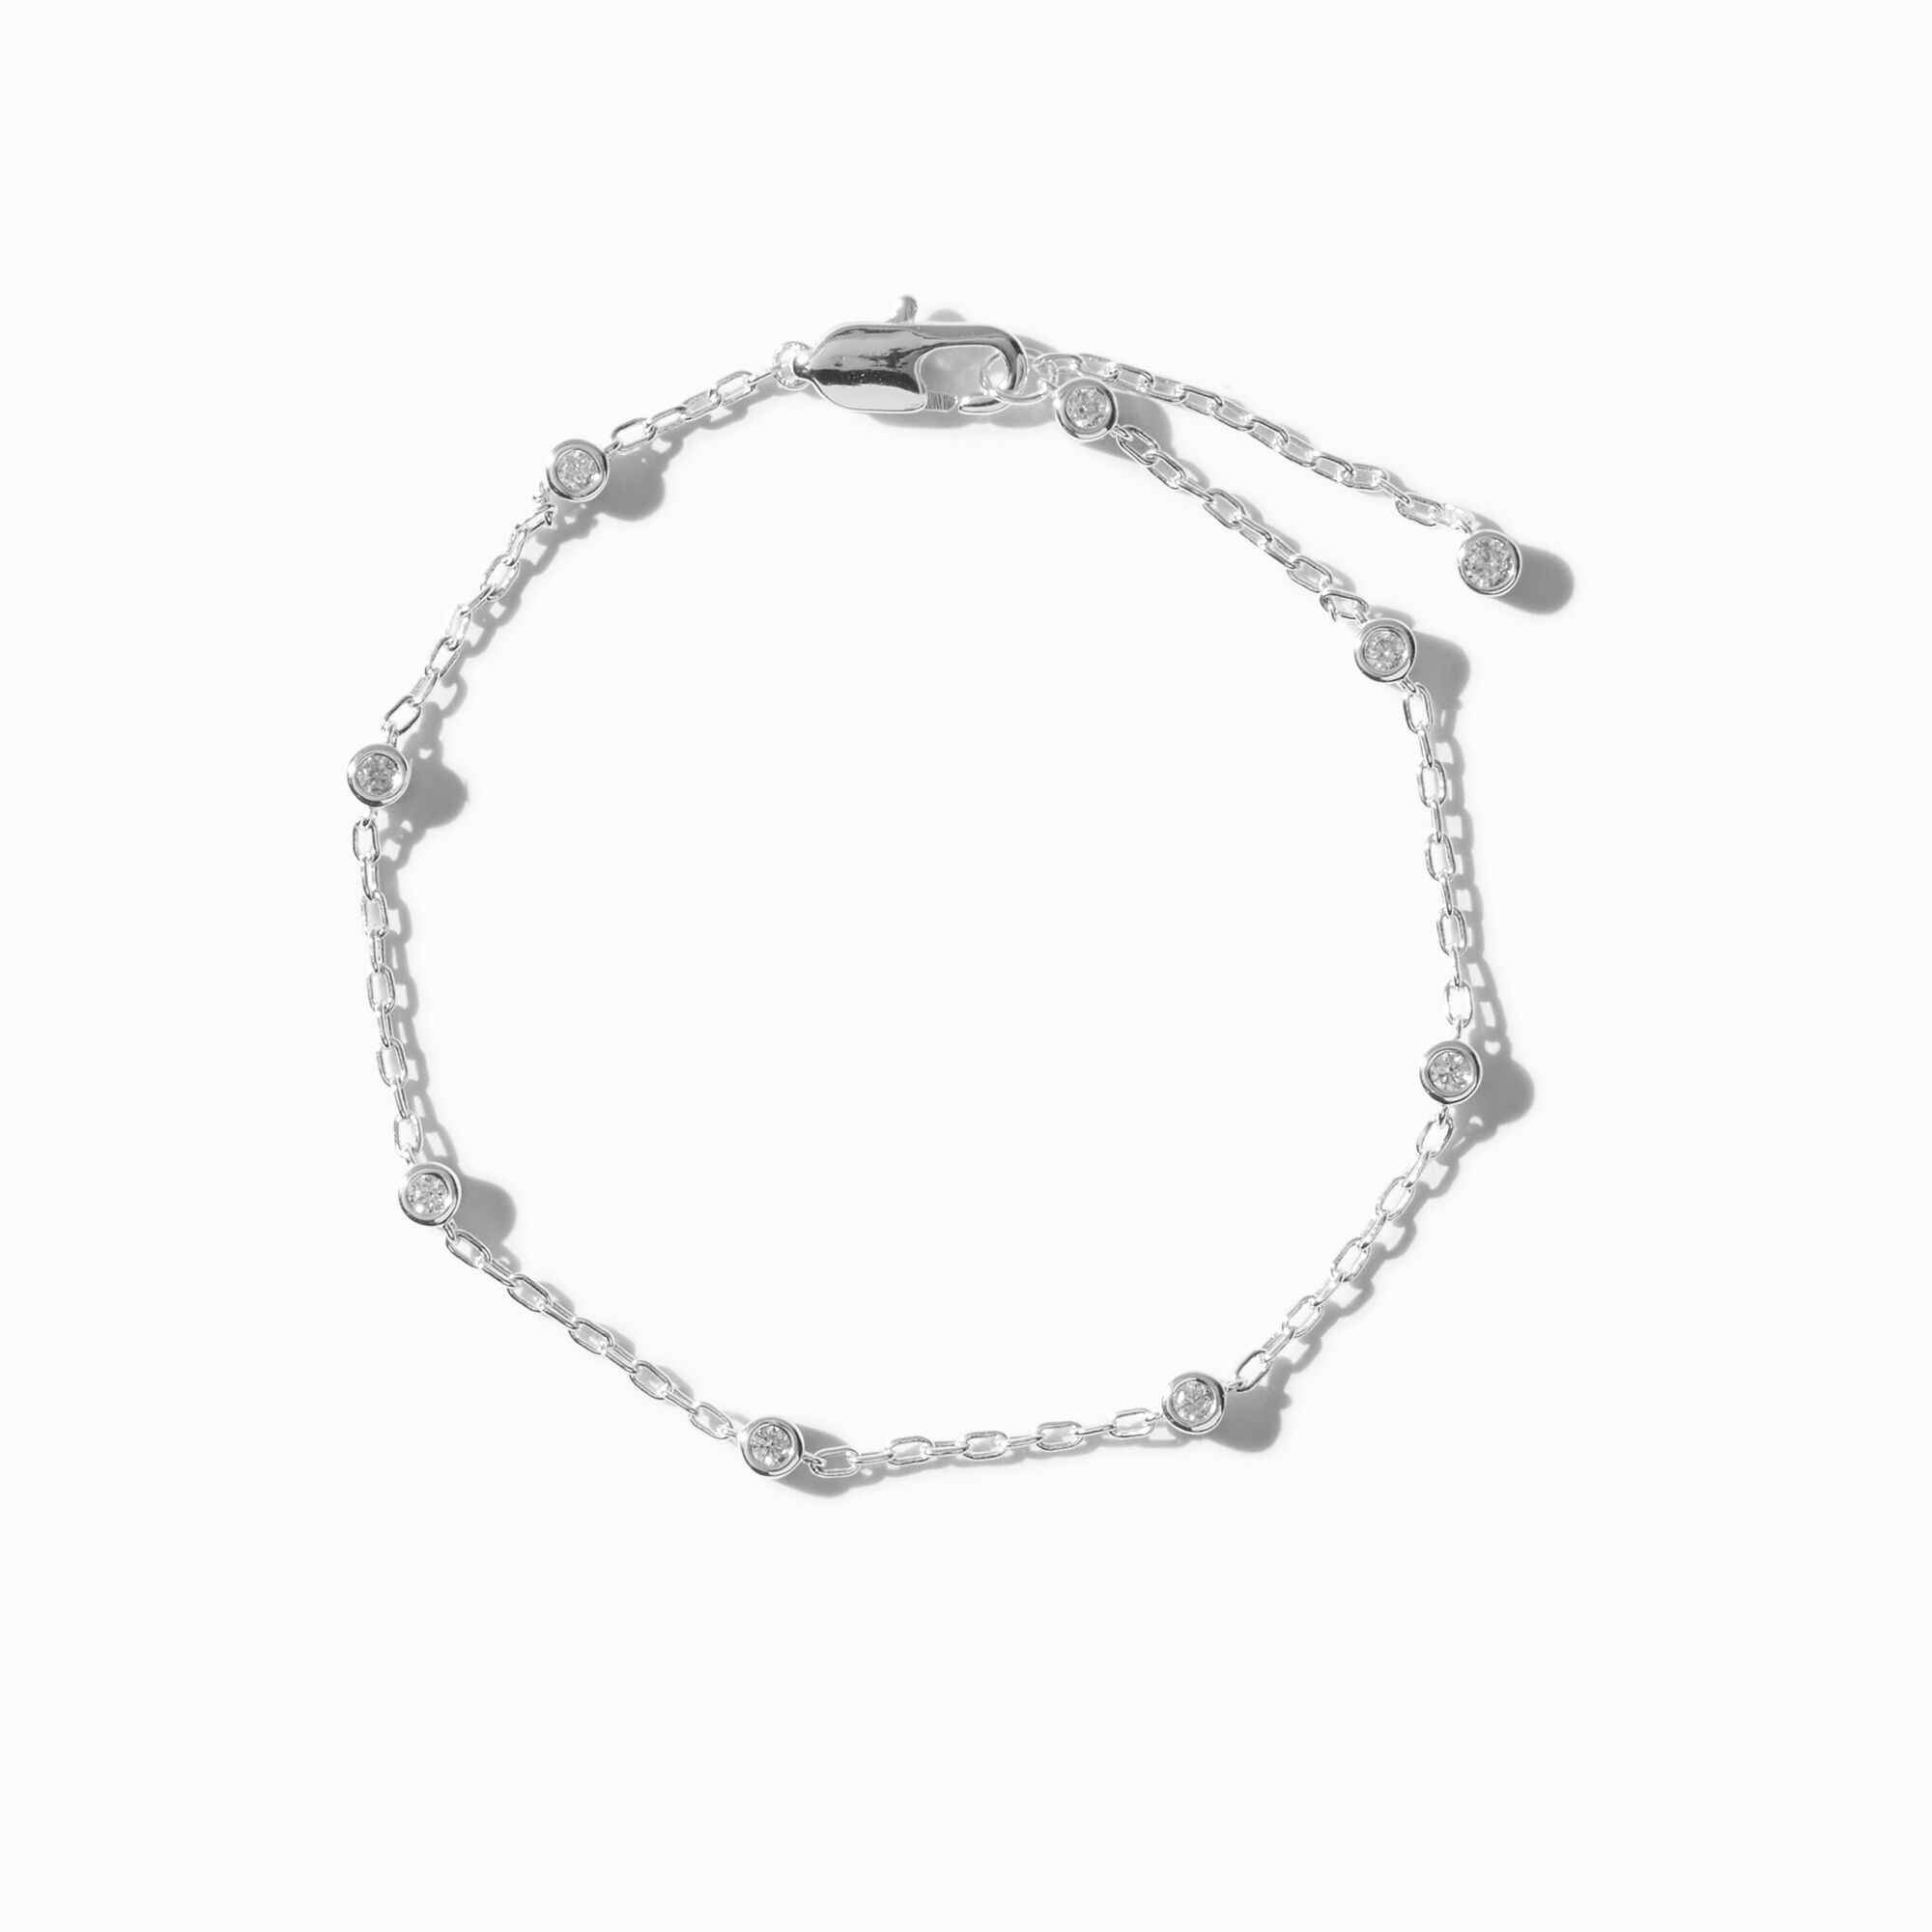 View C Luxe By Claires Plated Cubic Zirconia Confetti Chain Bracelet Silver information